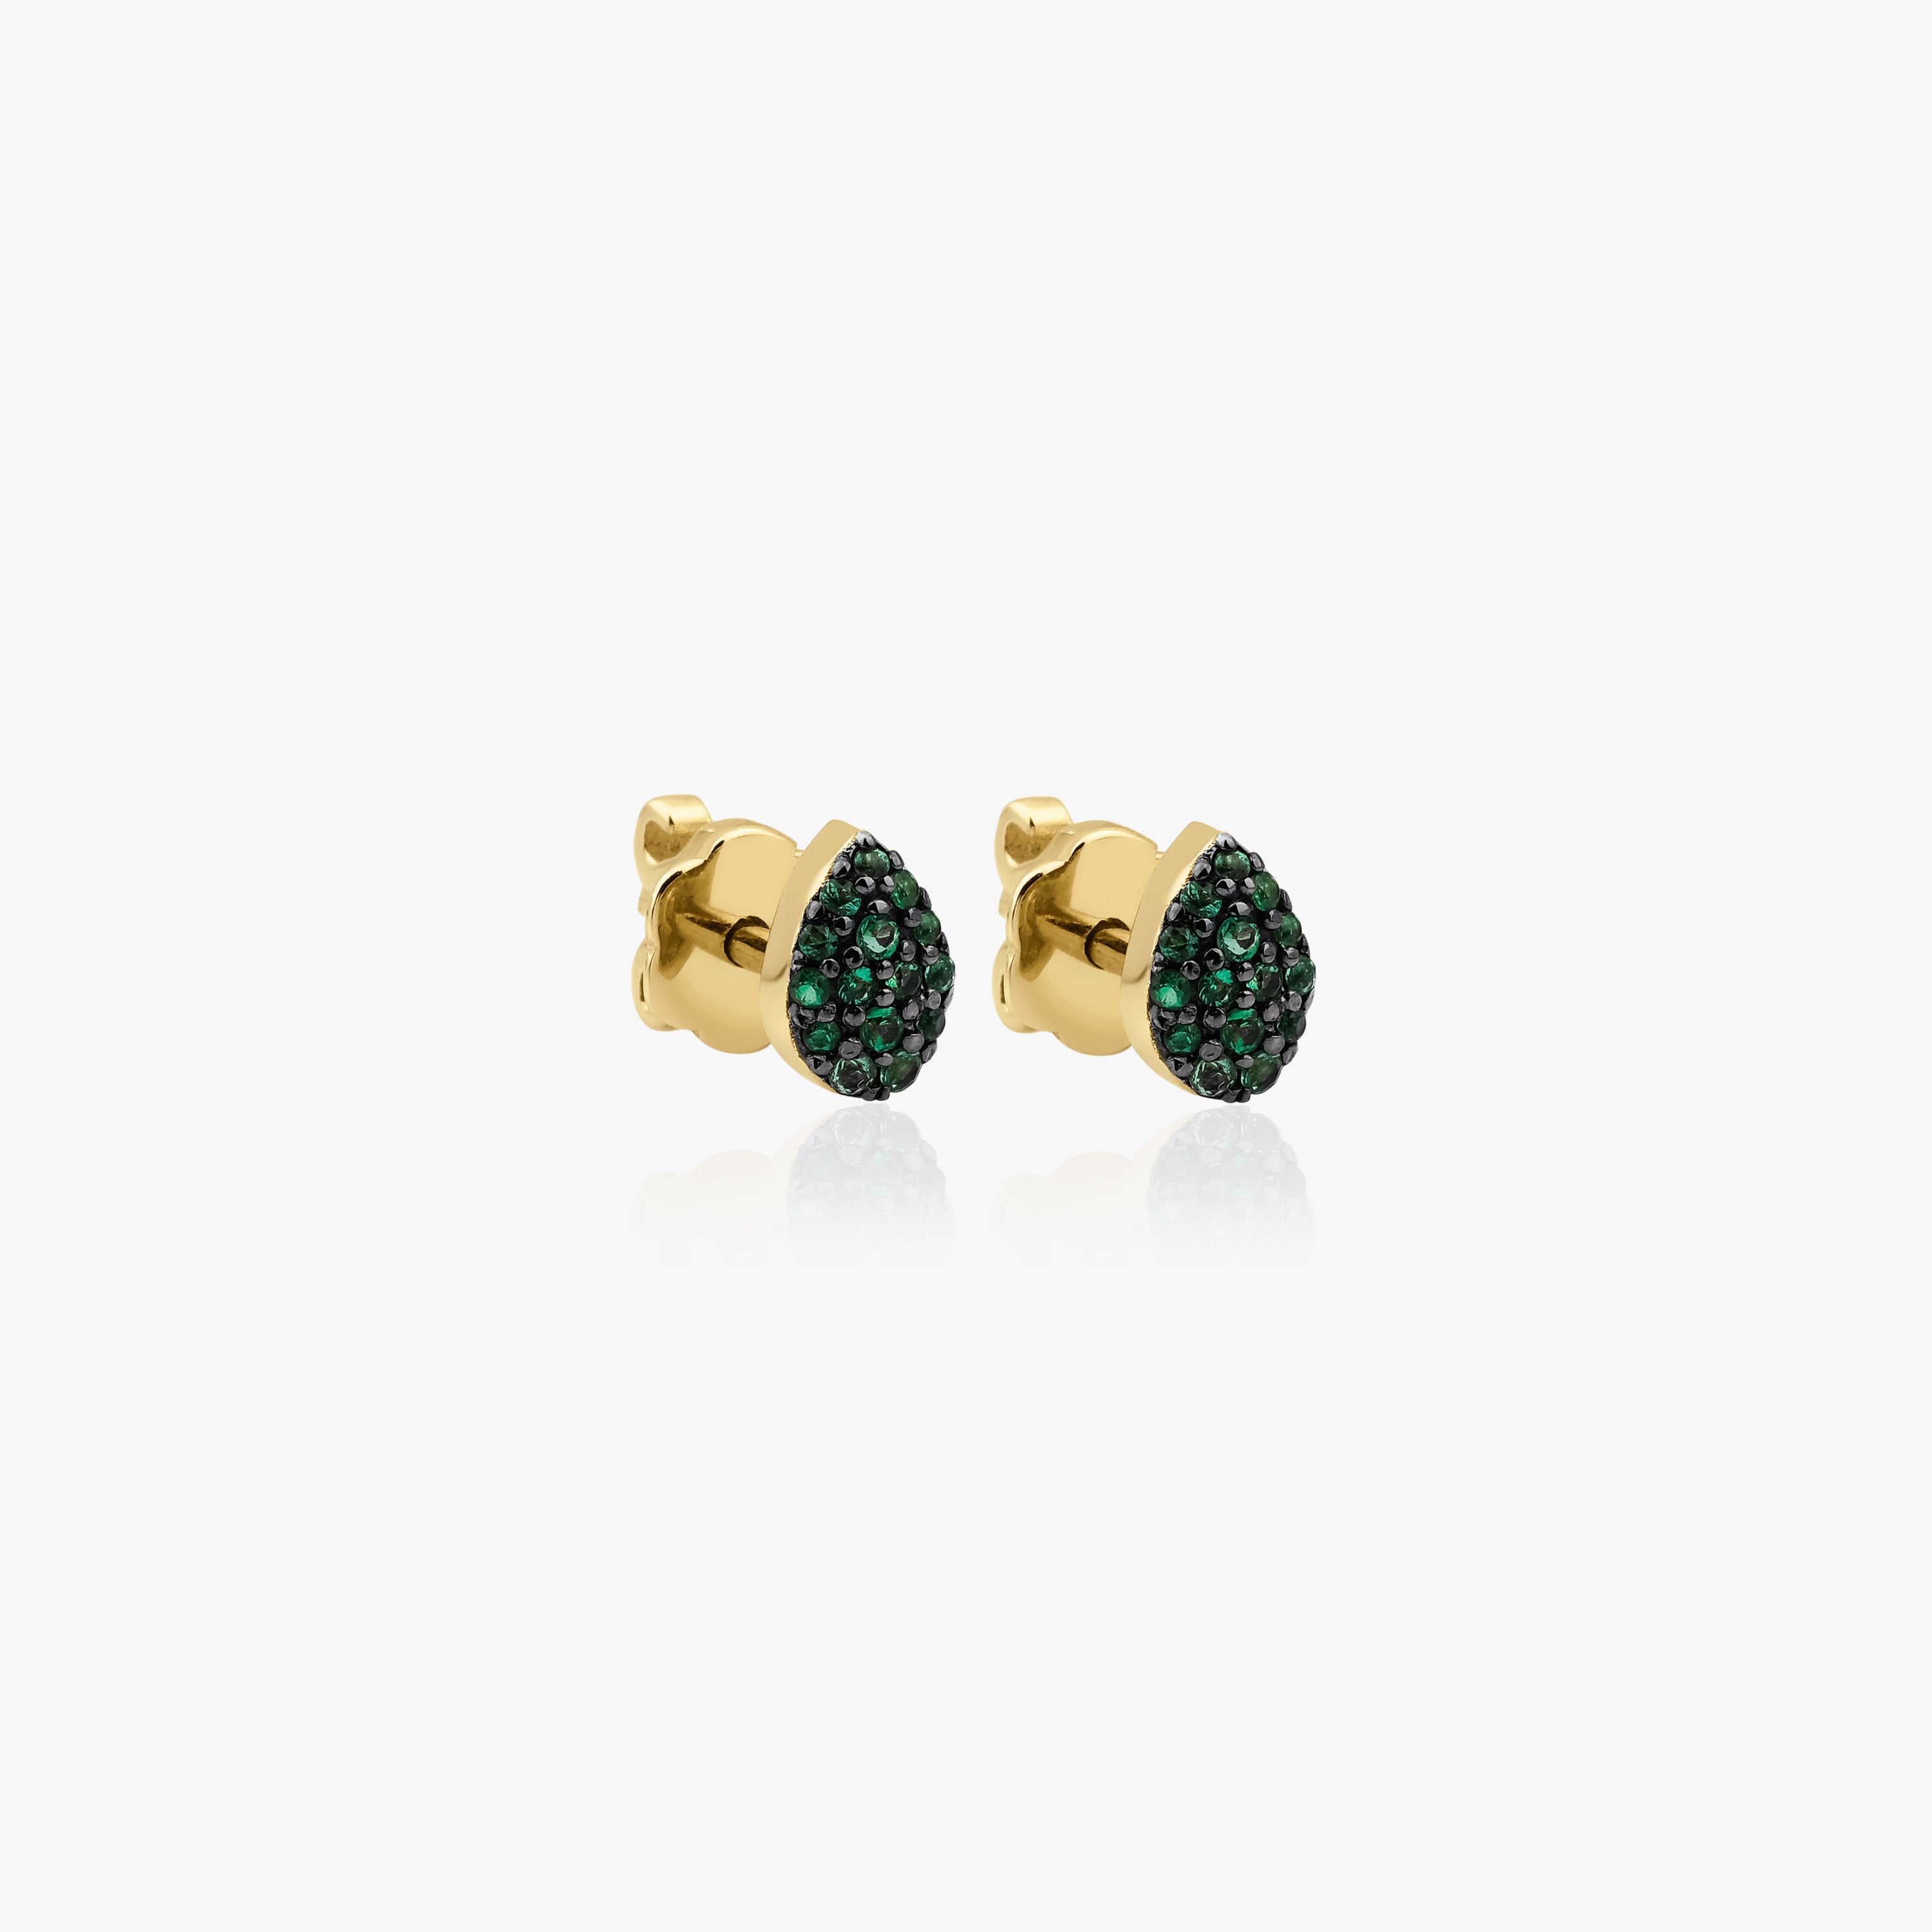 Pave Emerald Earrings Available in 14K and 18K Gold